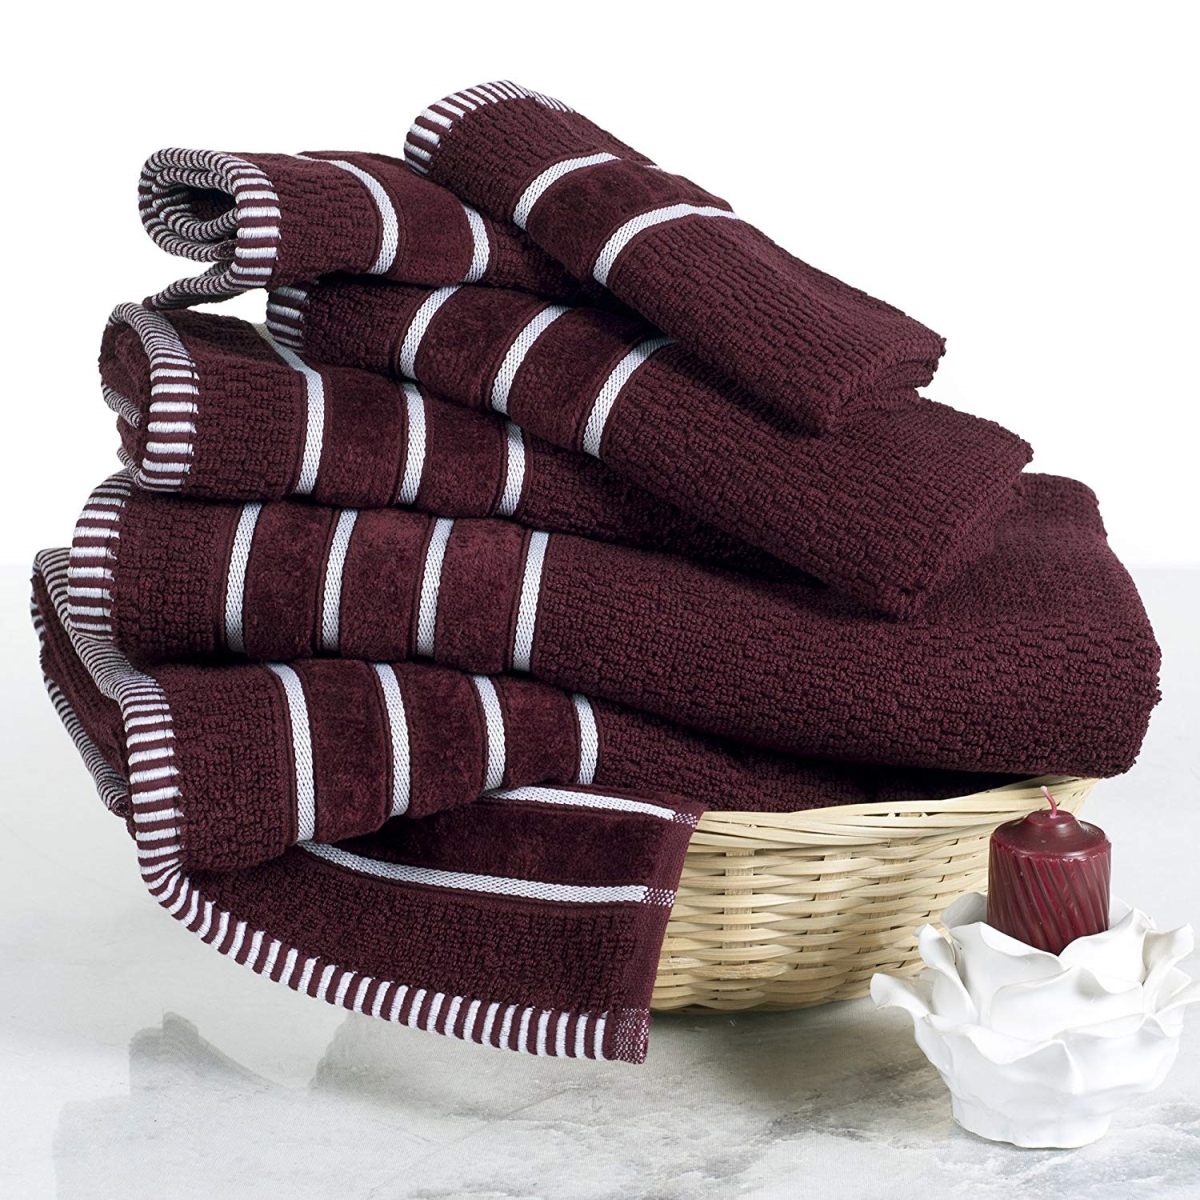 Picture of Bedford Home 67A-74209 Home 100 Percent Cotton Weave 6 Piece Towel Set - Burgundy